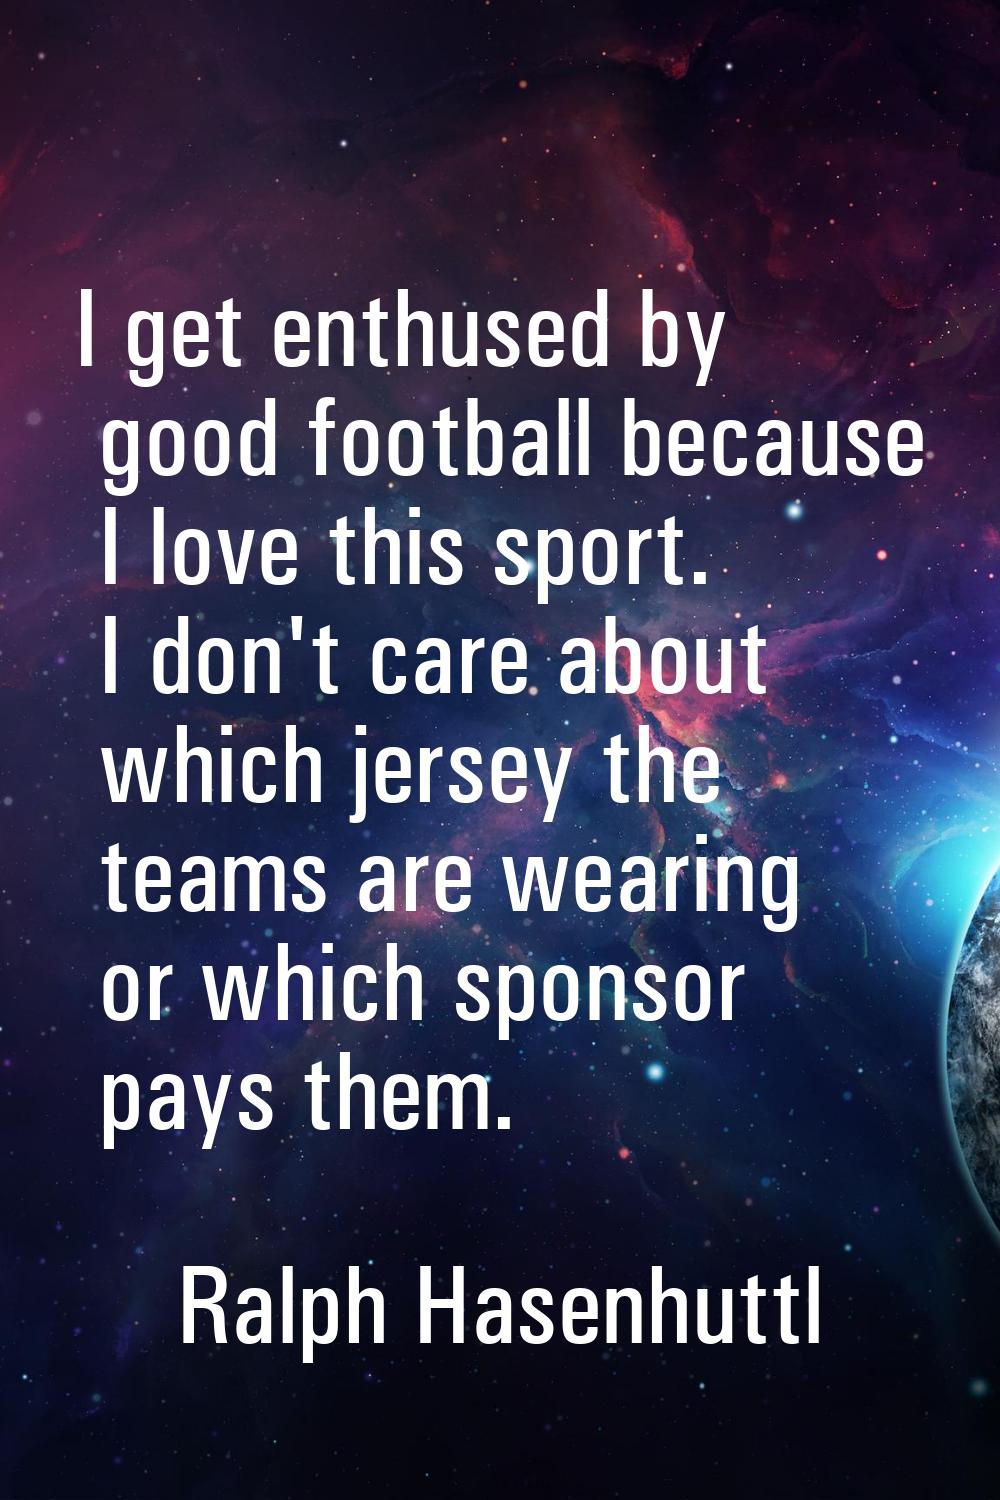 I get enthused by good football because I love this sport. I don't care about which jersey the team